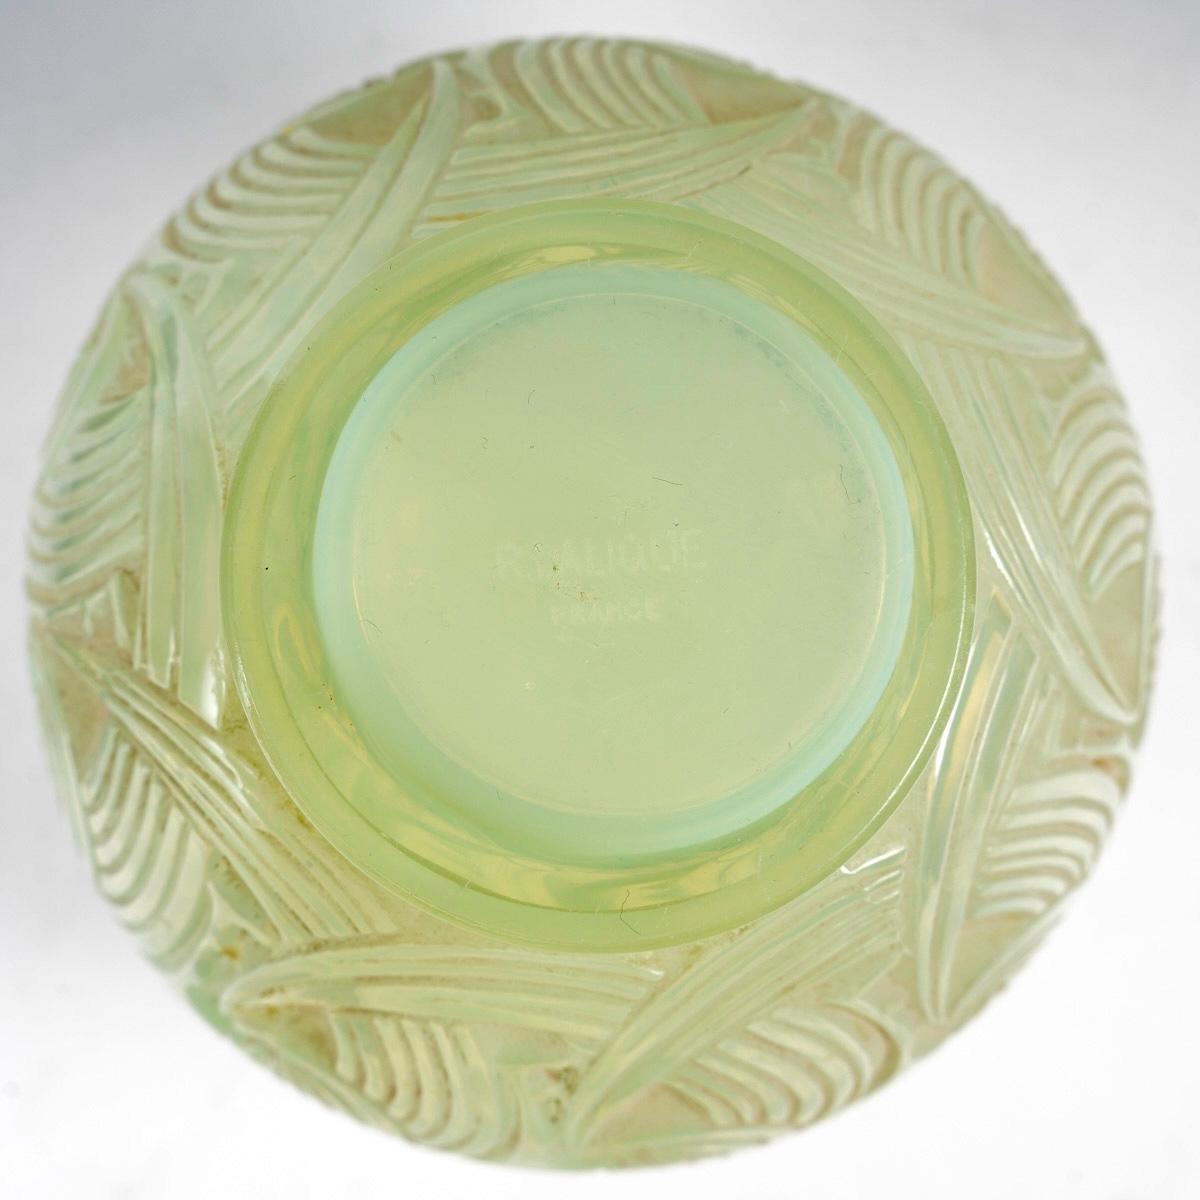 Molded 1931 René Lalique, Vase Le Mans Cased Celadon Green Glass with Grey Patina For Sale